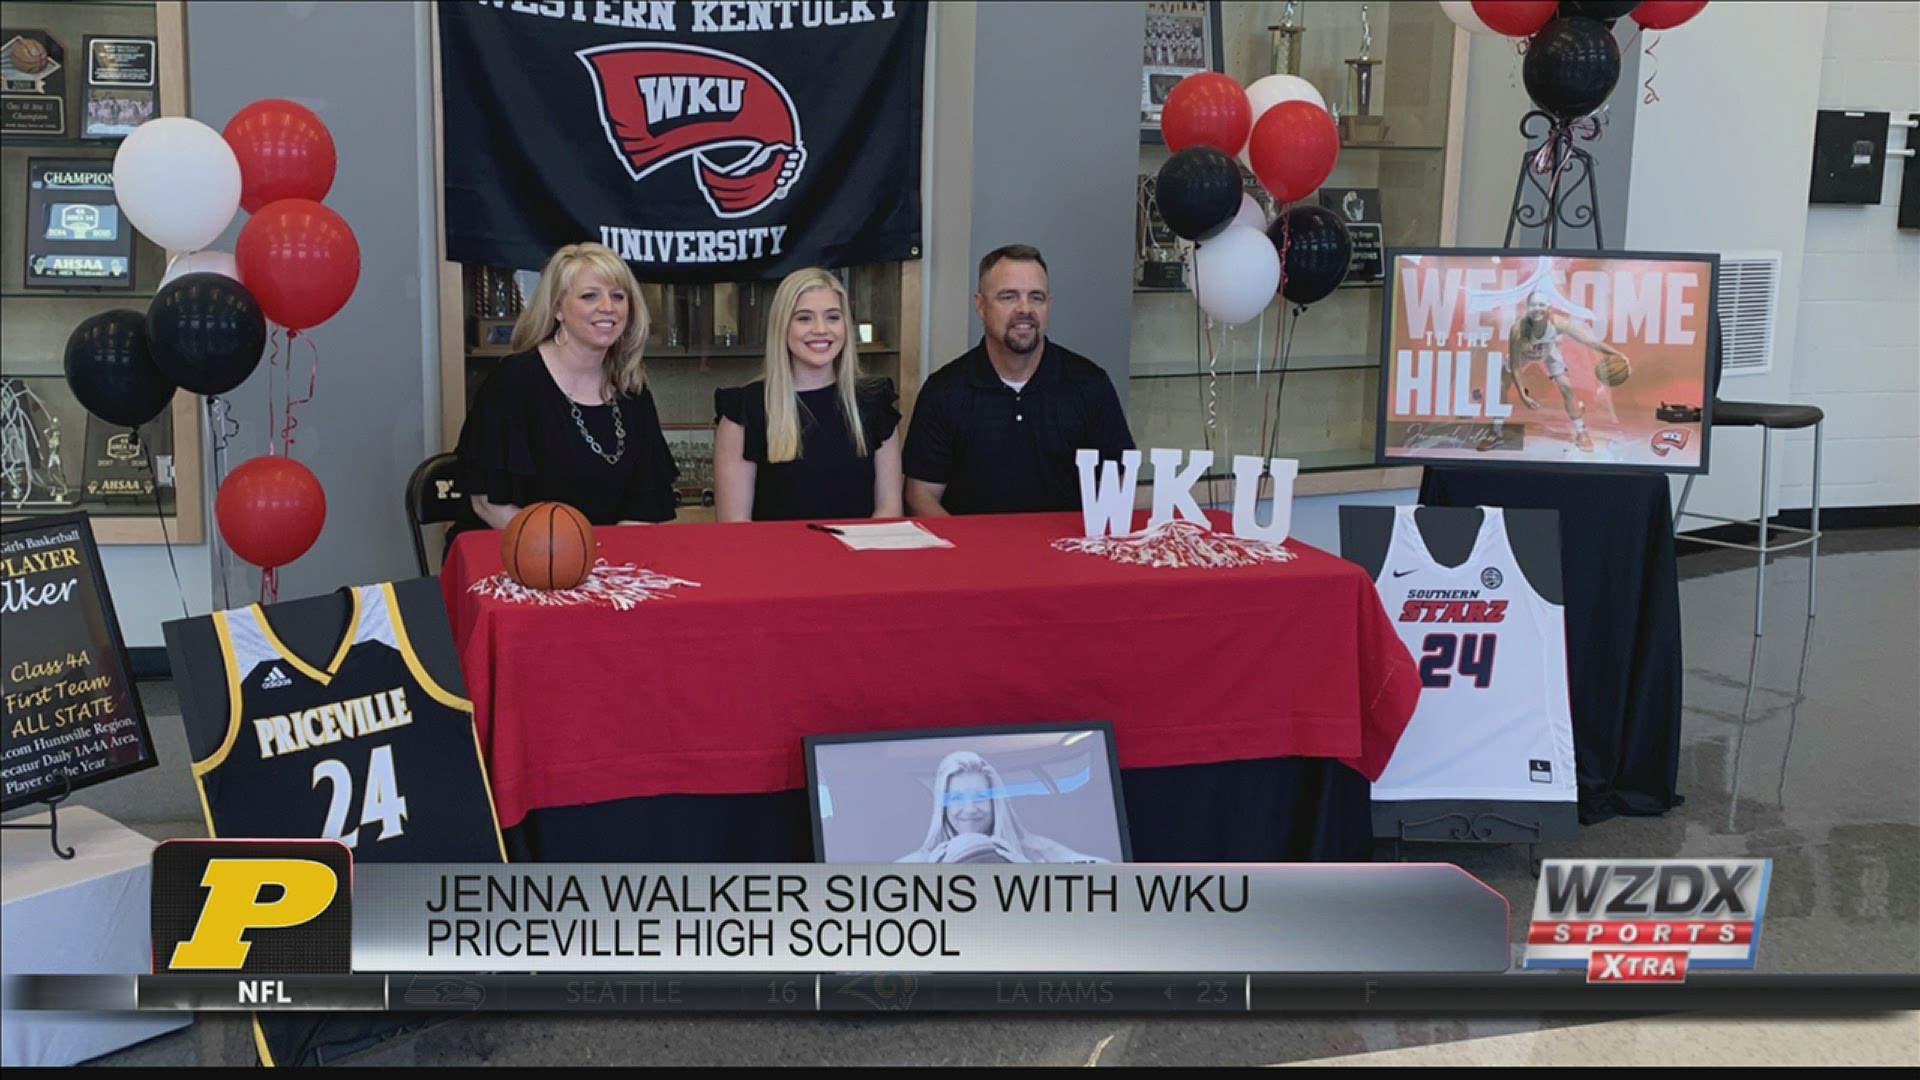 Priceville point guard Jenna Walker signed a national letter of intent with Western Kentucky.